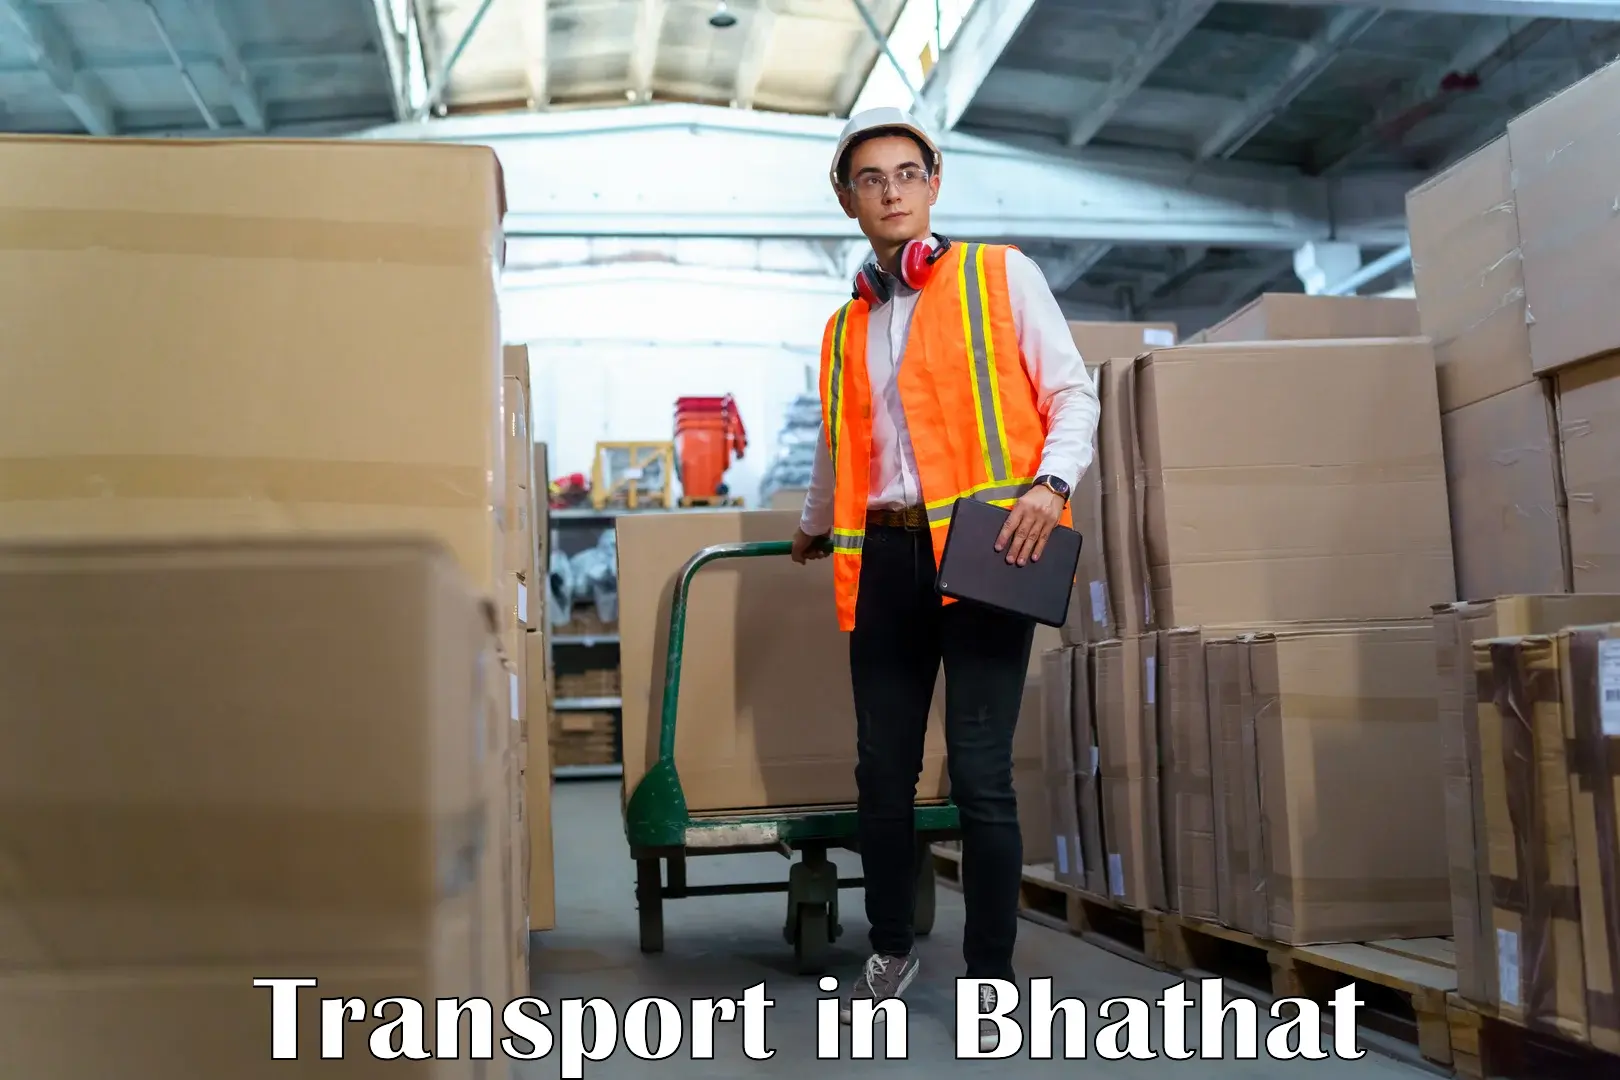 Container transport service in Bhathat